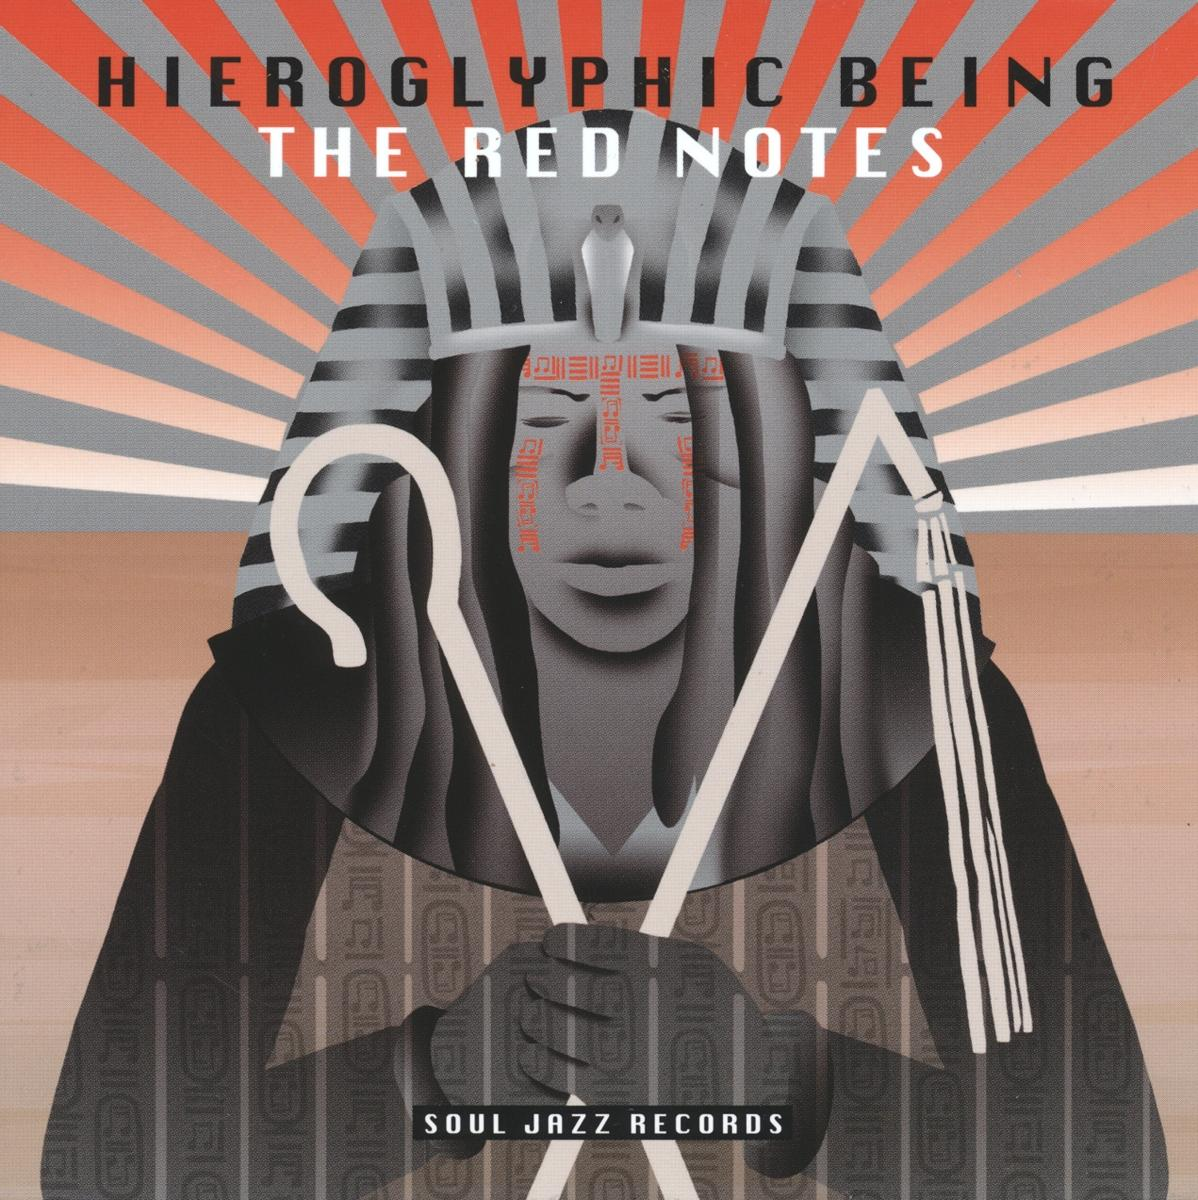 Hieroglyphic Being - THE - (Vinyl) NOTES RED